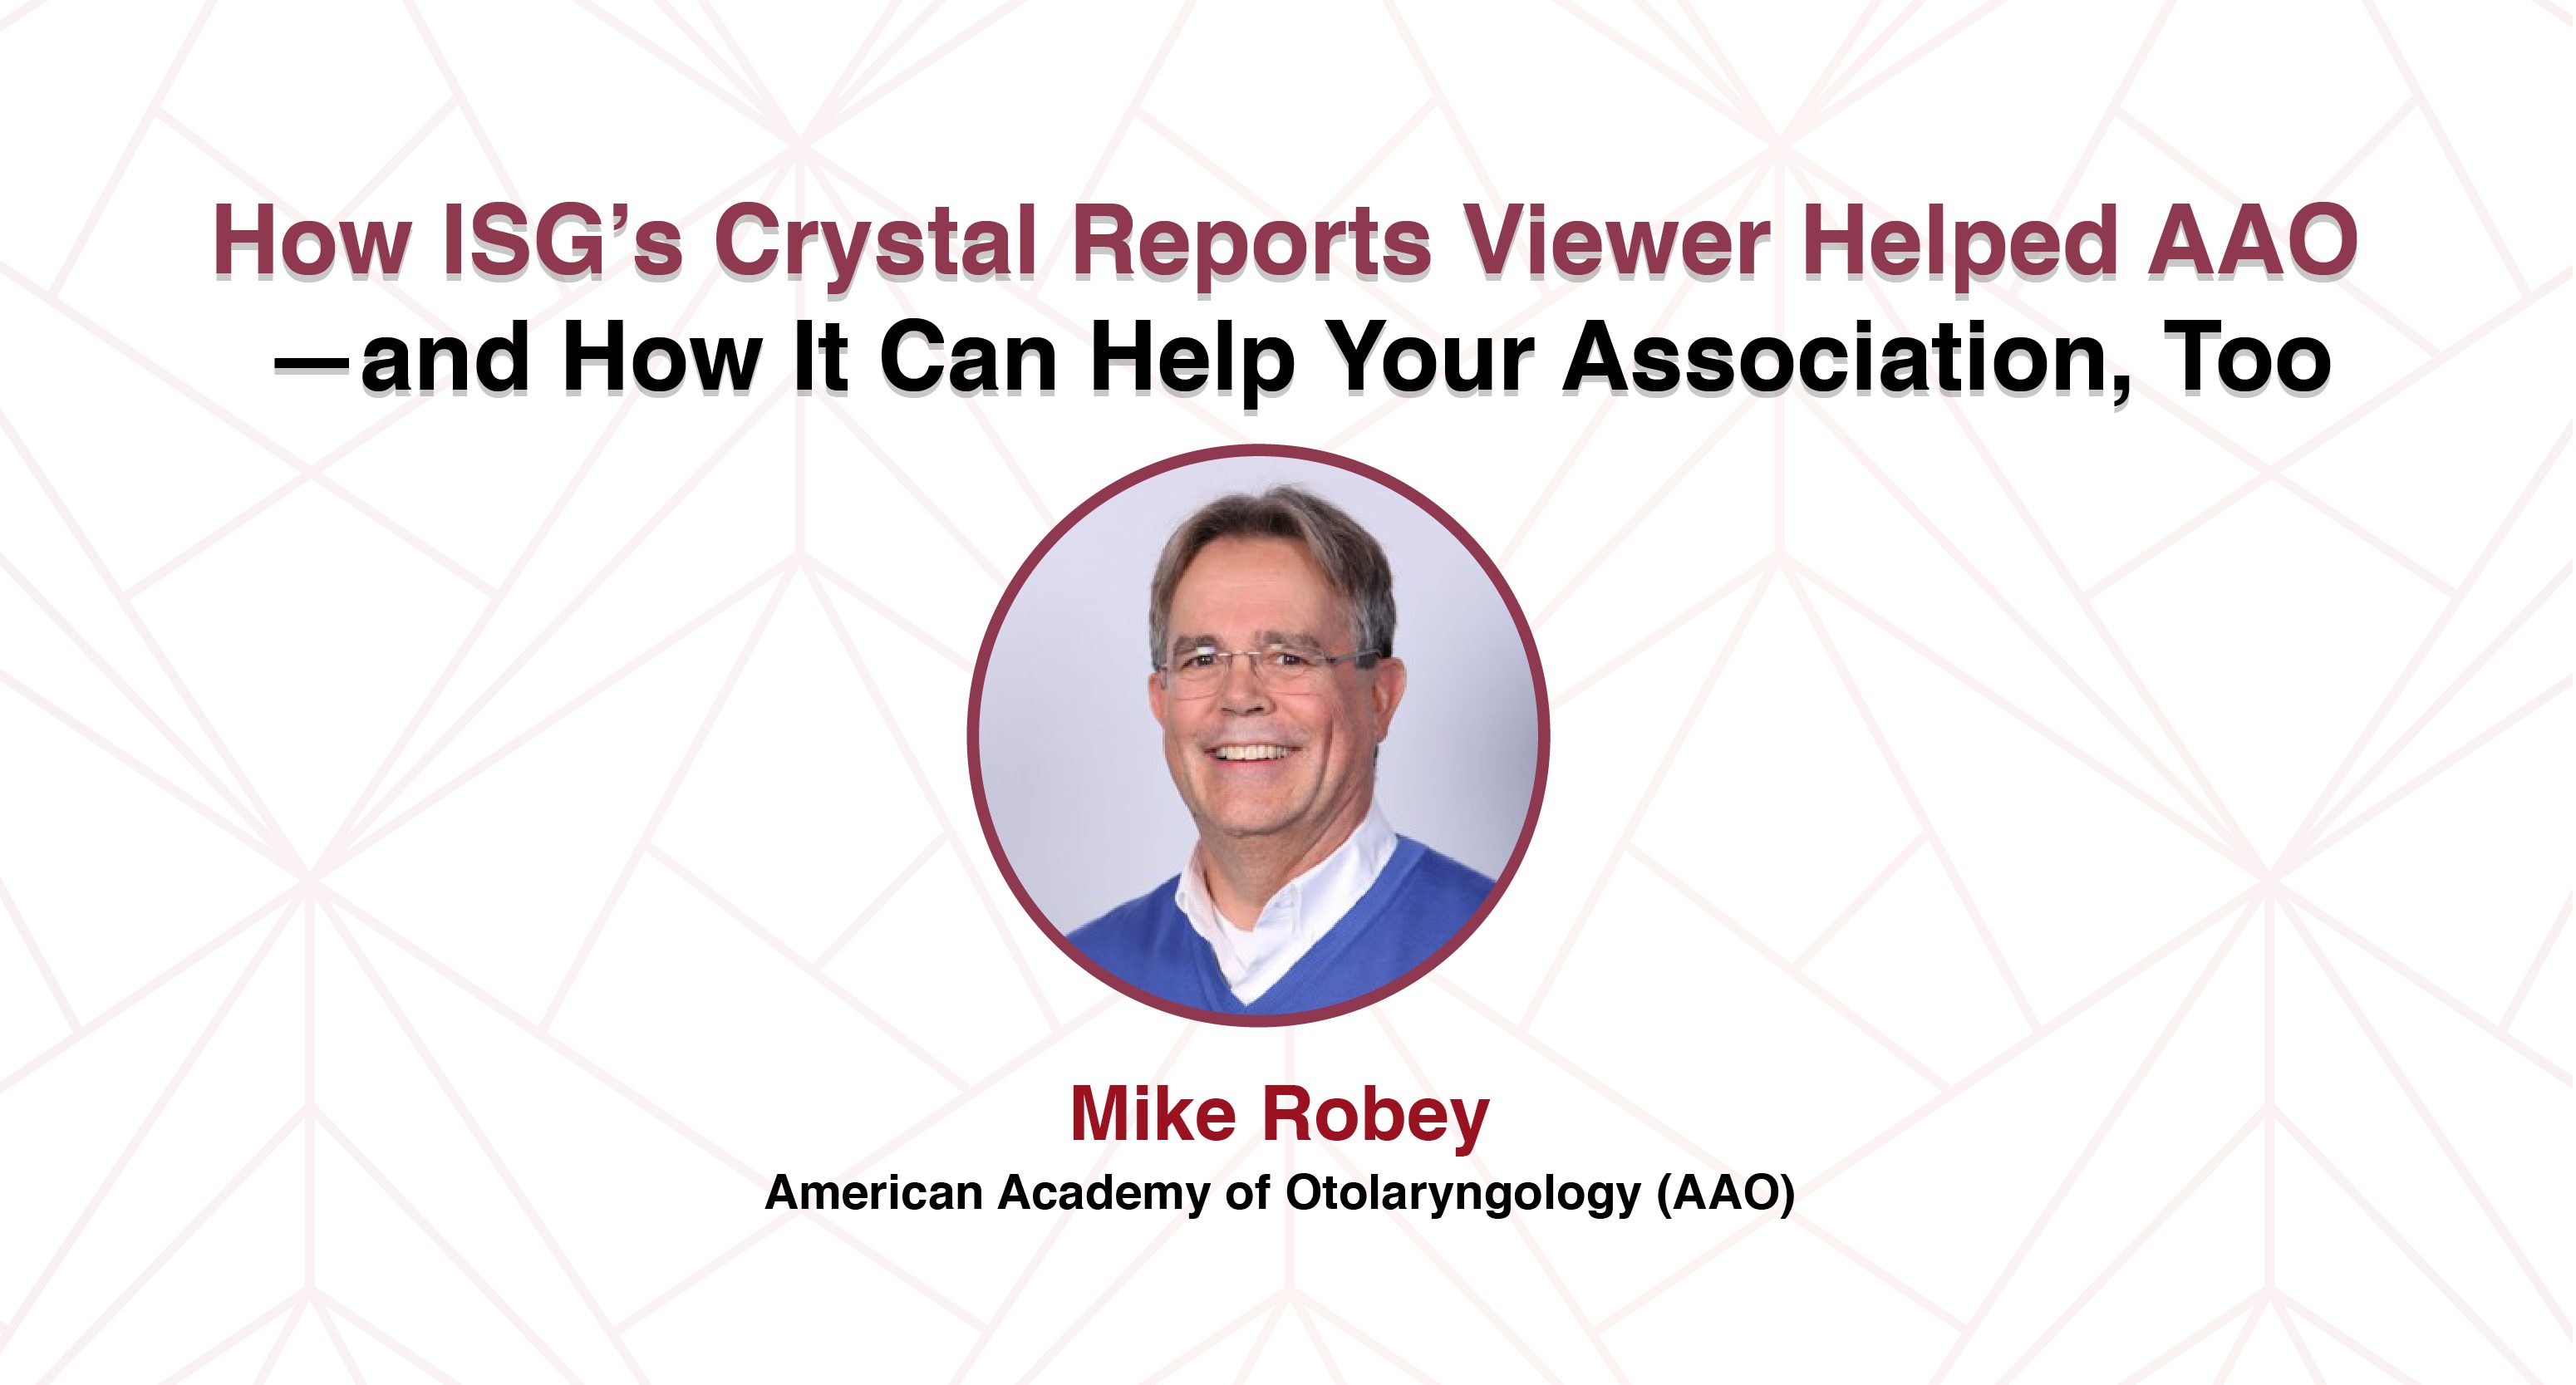 Mike Robey for AAO